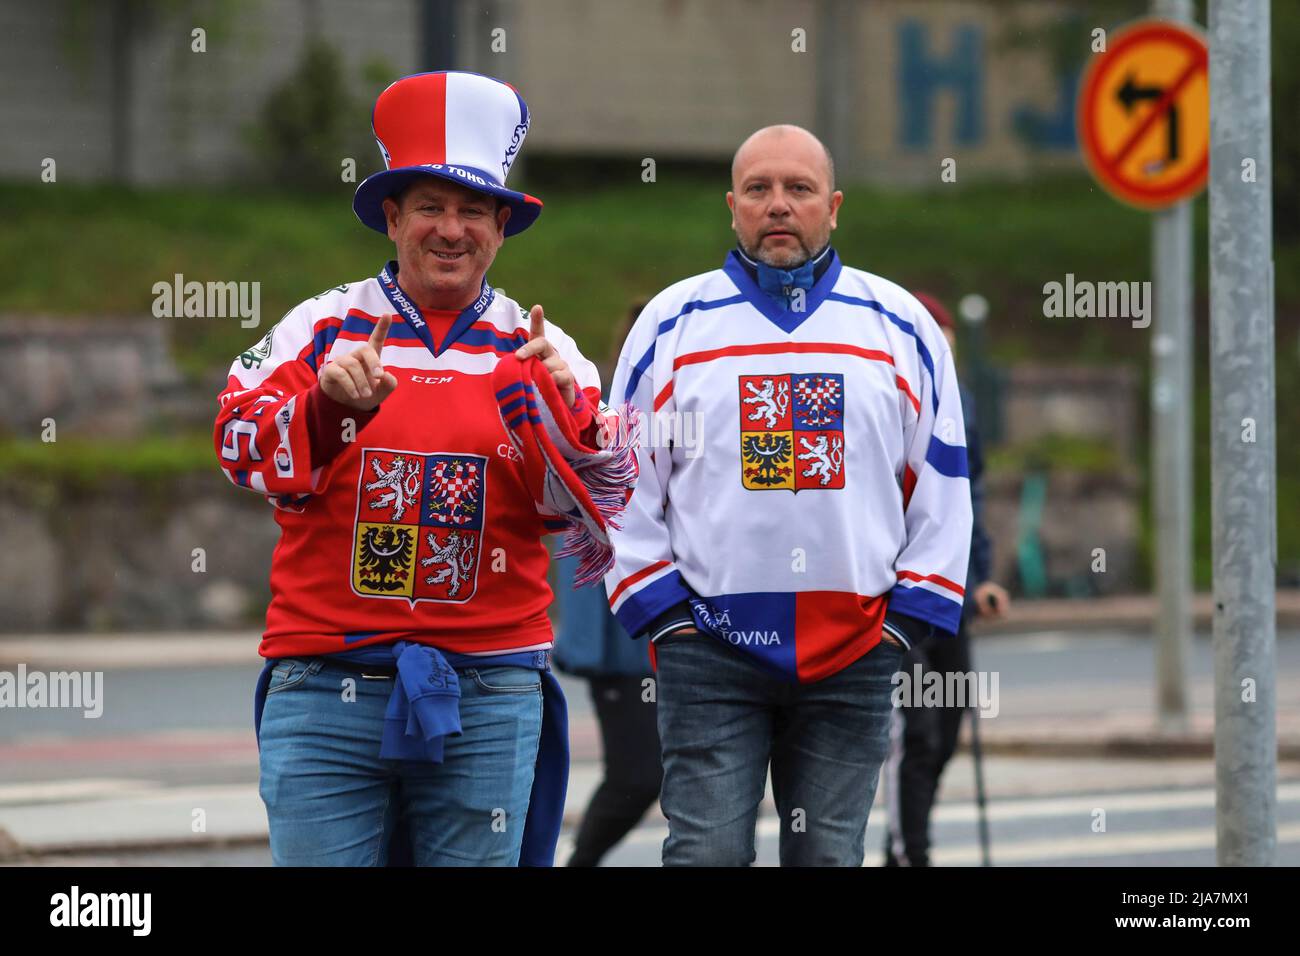 Fans of the Czech ice hockey national team celebrate the victory of their team in the quarterfinal of the Ice Hockey World Championship 2022. Fans came from all over the world to support their teams at Helsinki Ice Hall. Stock Photo